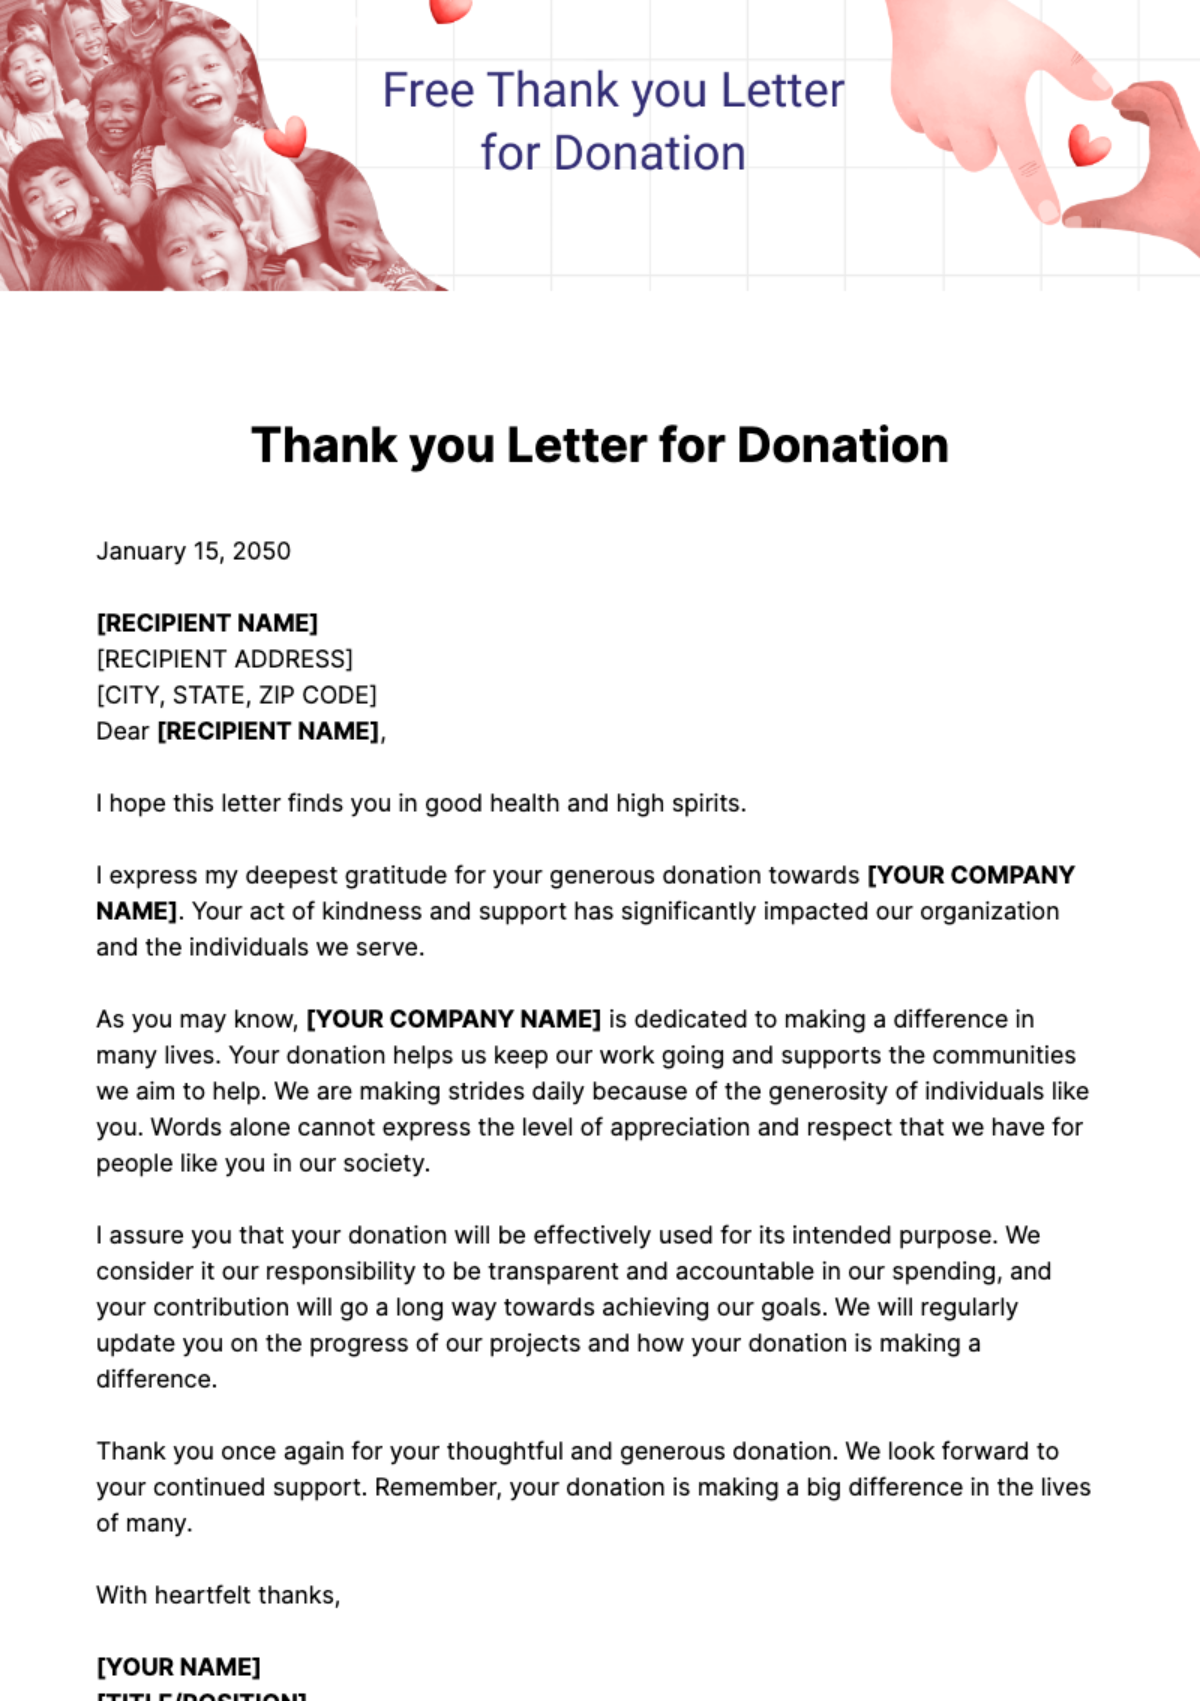 Free Thank you Letter for Donation Template